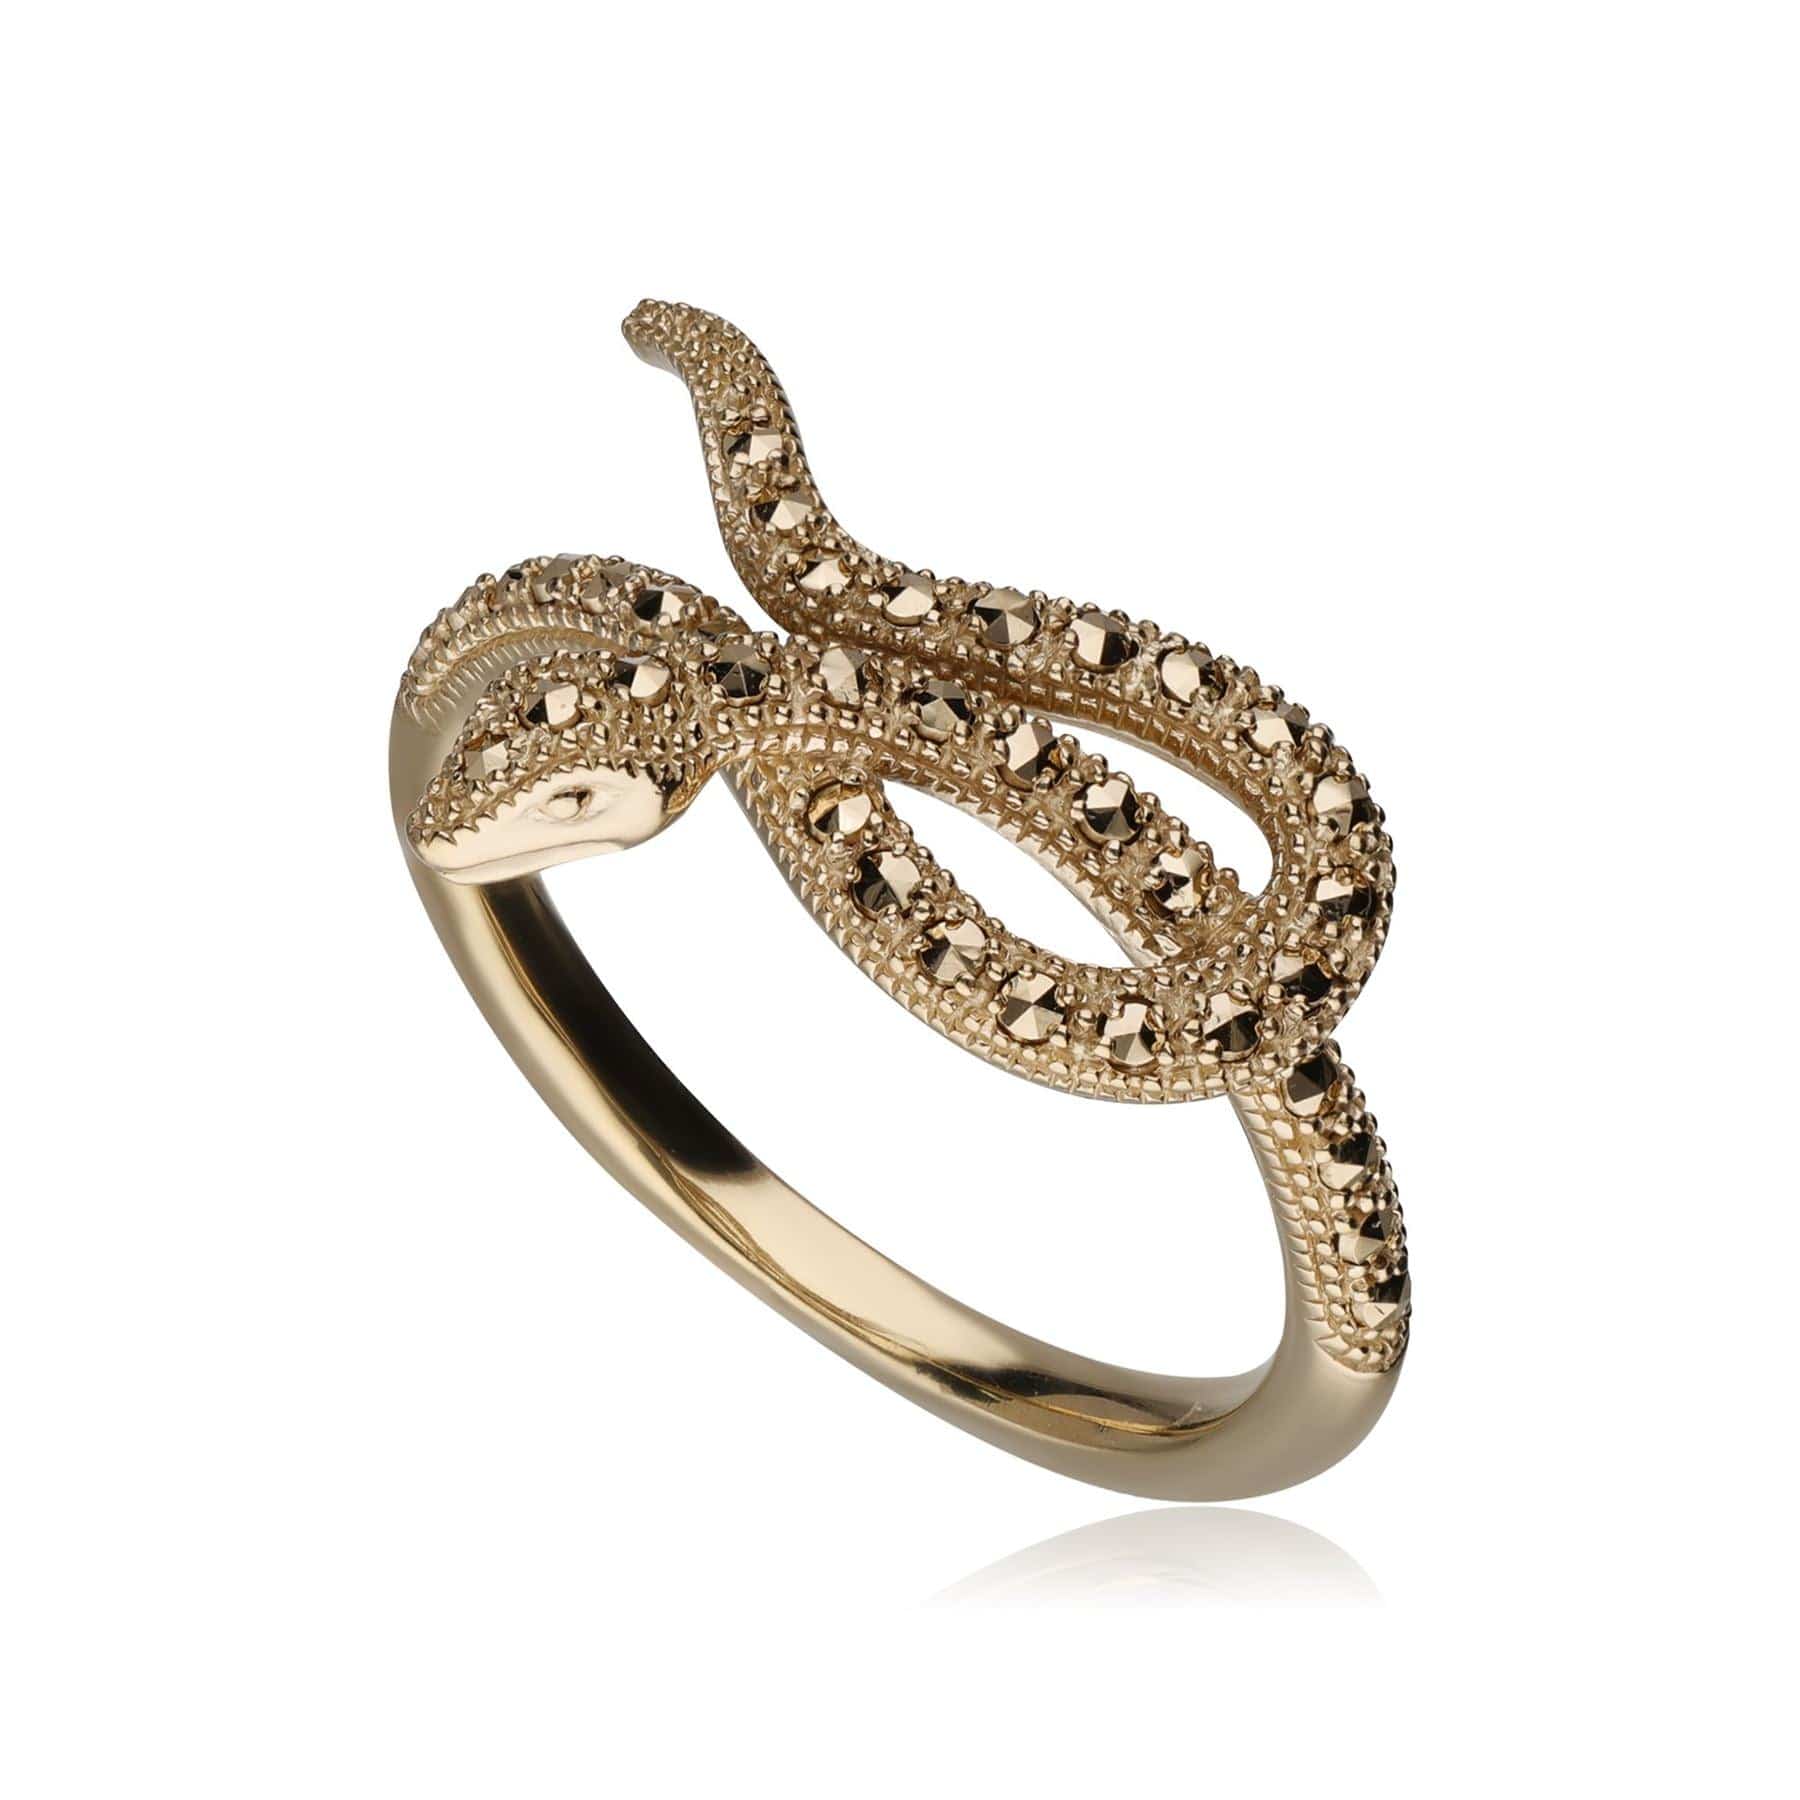 Image of Art Nouveau Marcasite Winding Snake Ring in 18ct Gold Plated Silver